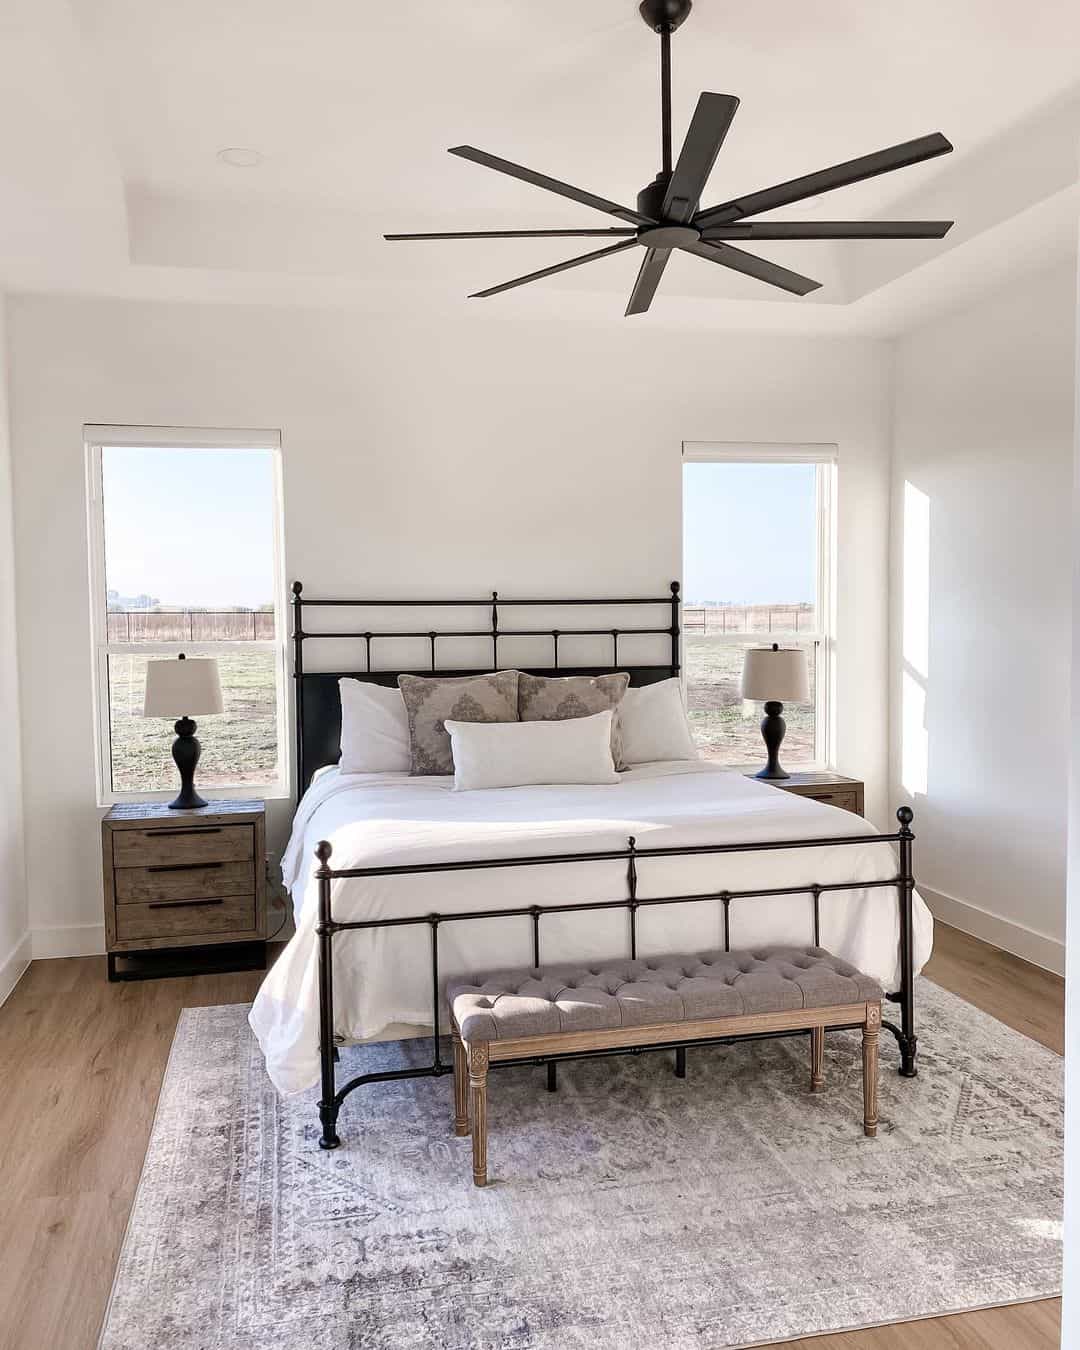 Tranquil White Bedroom with Sleek Black Ceiling Fan